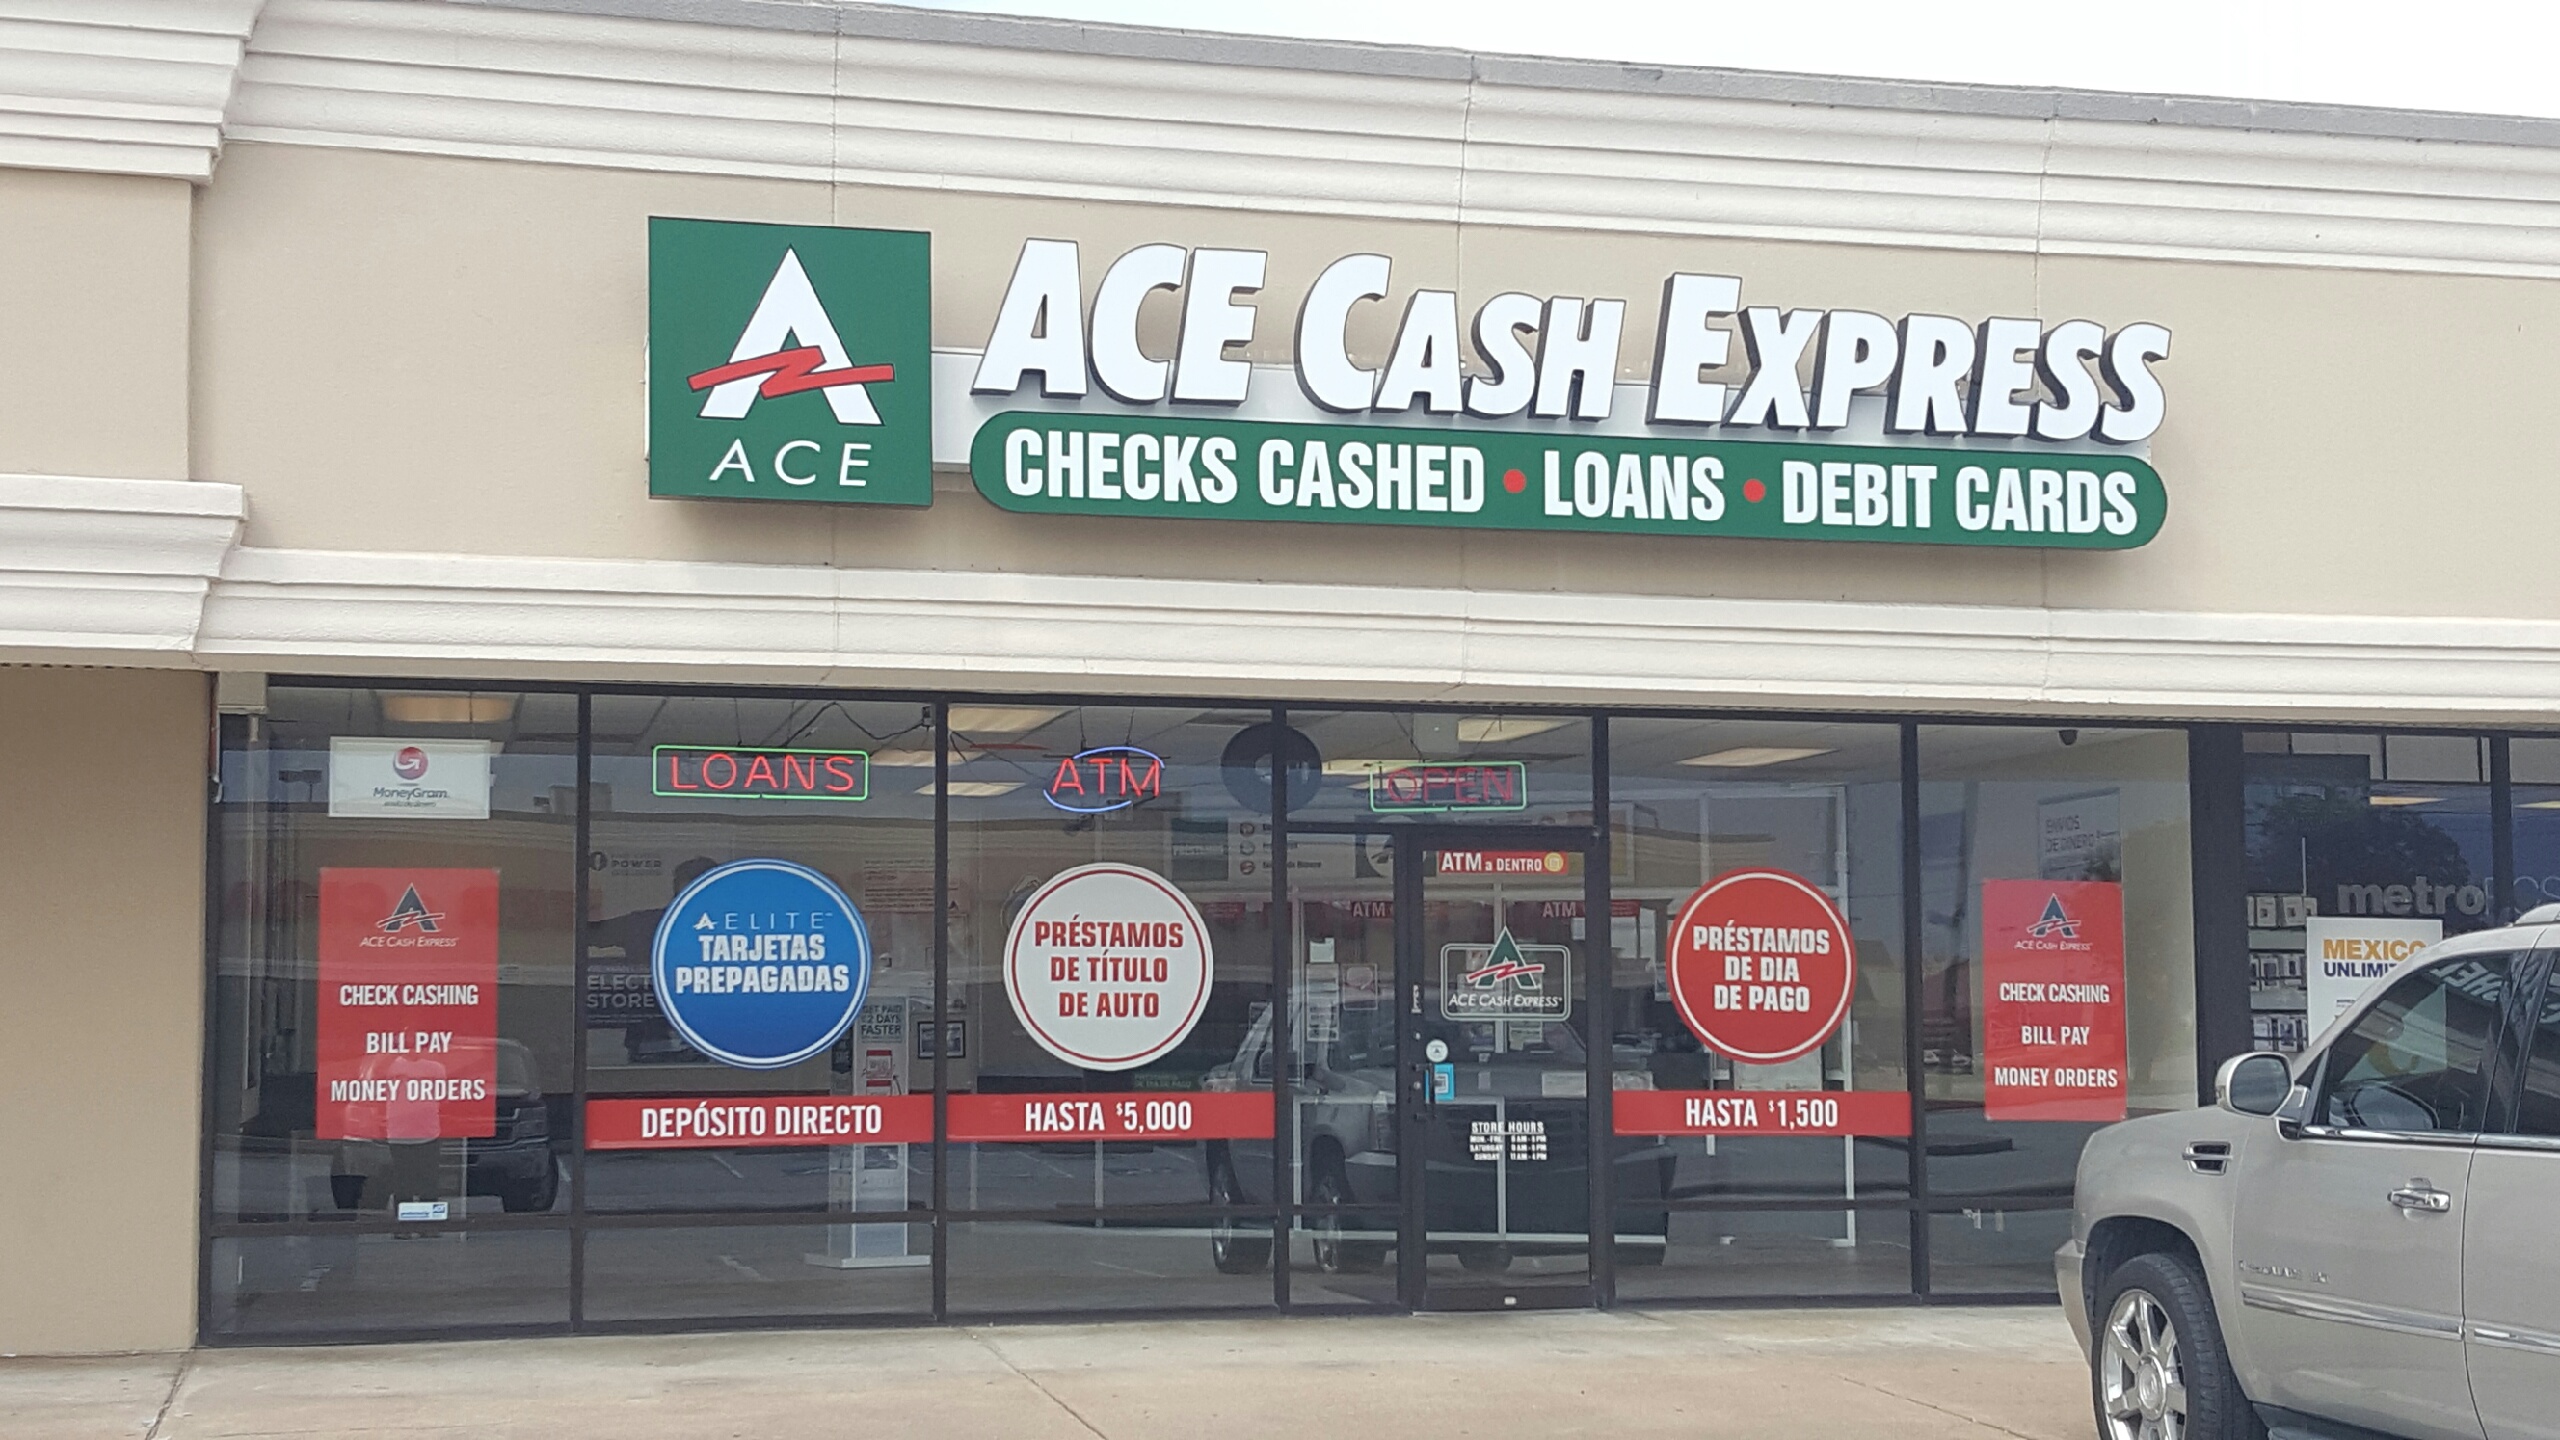 ACE Cash Express Coupons near me in Katy, TX 77449 | 8coupons